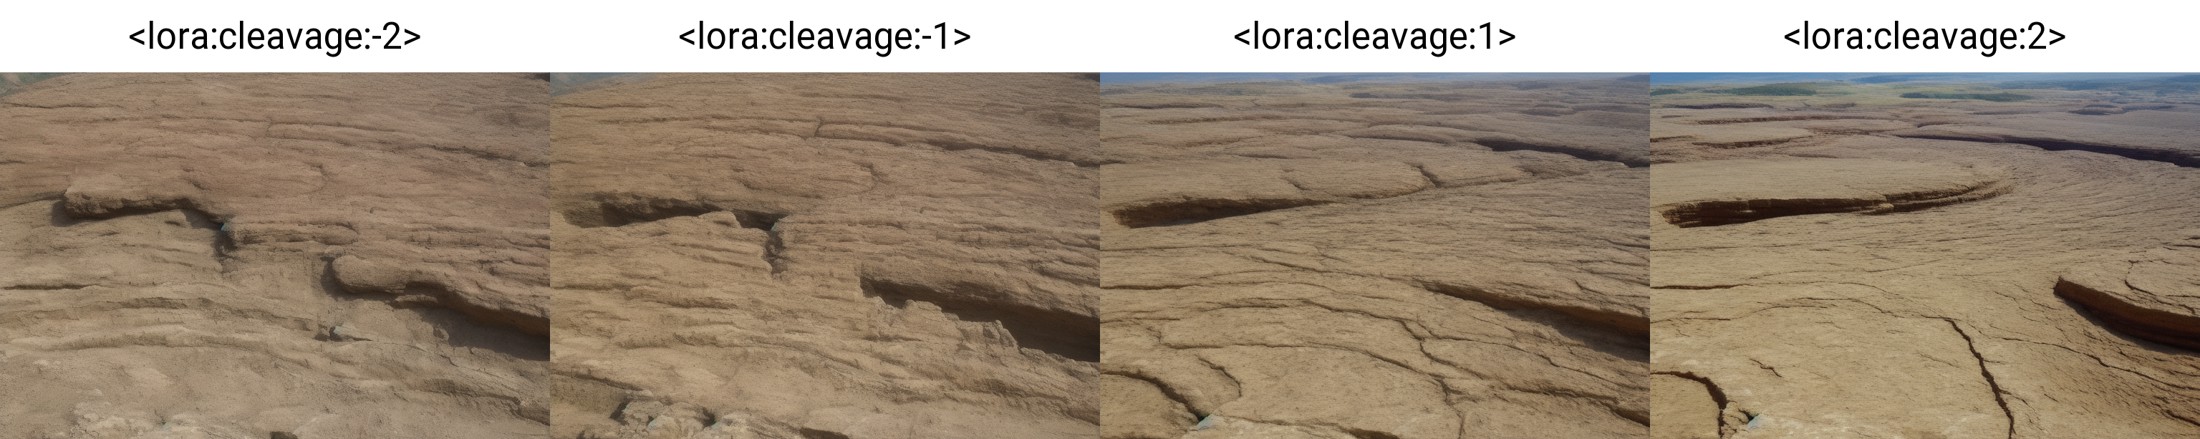 <lora:cleavage:-2>, cleavage, geology, petrology, (landscape:1.2), no_humans, sedimentary, diagenetic foliation